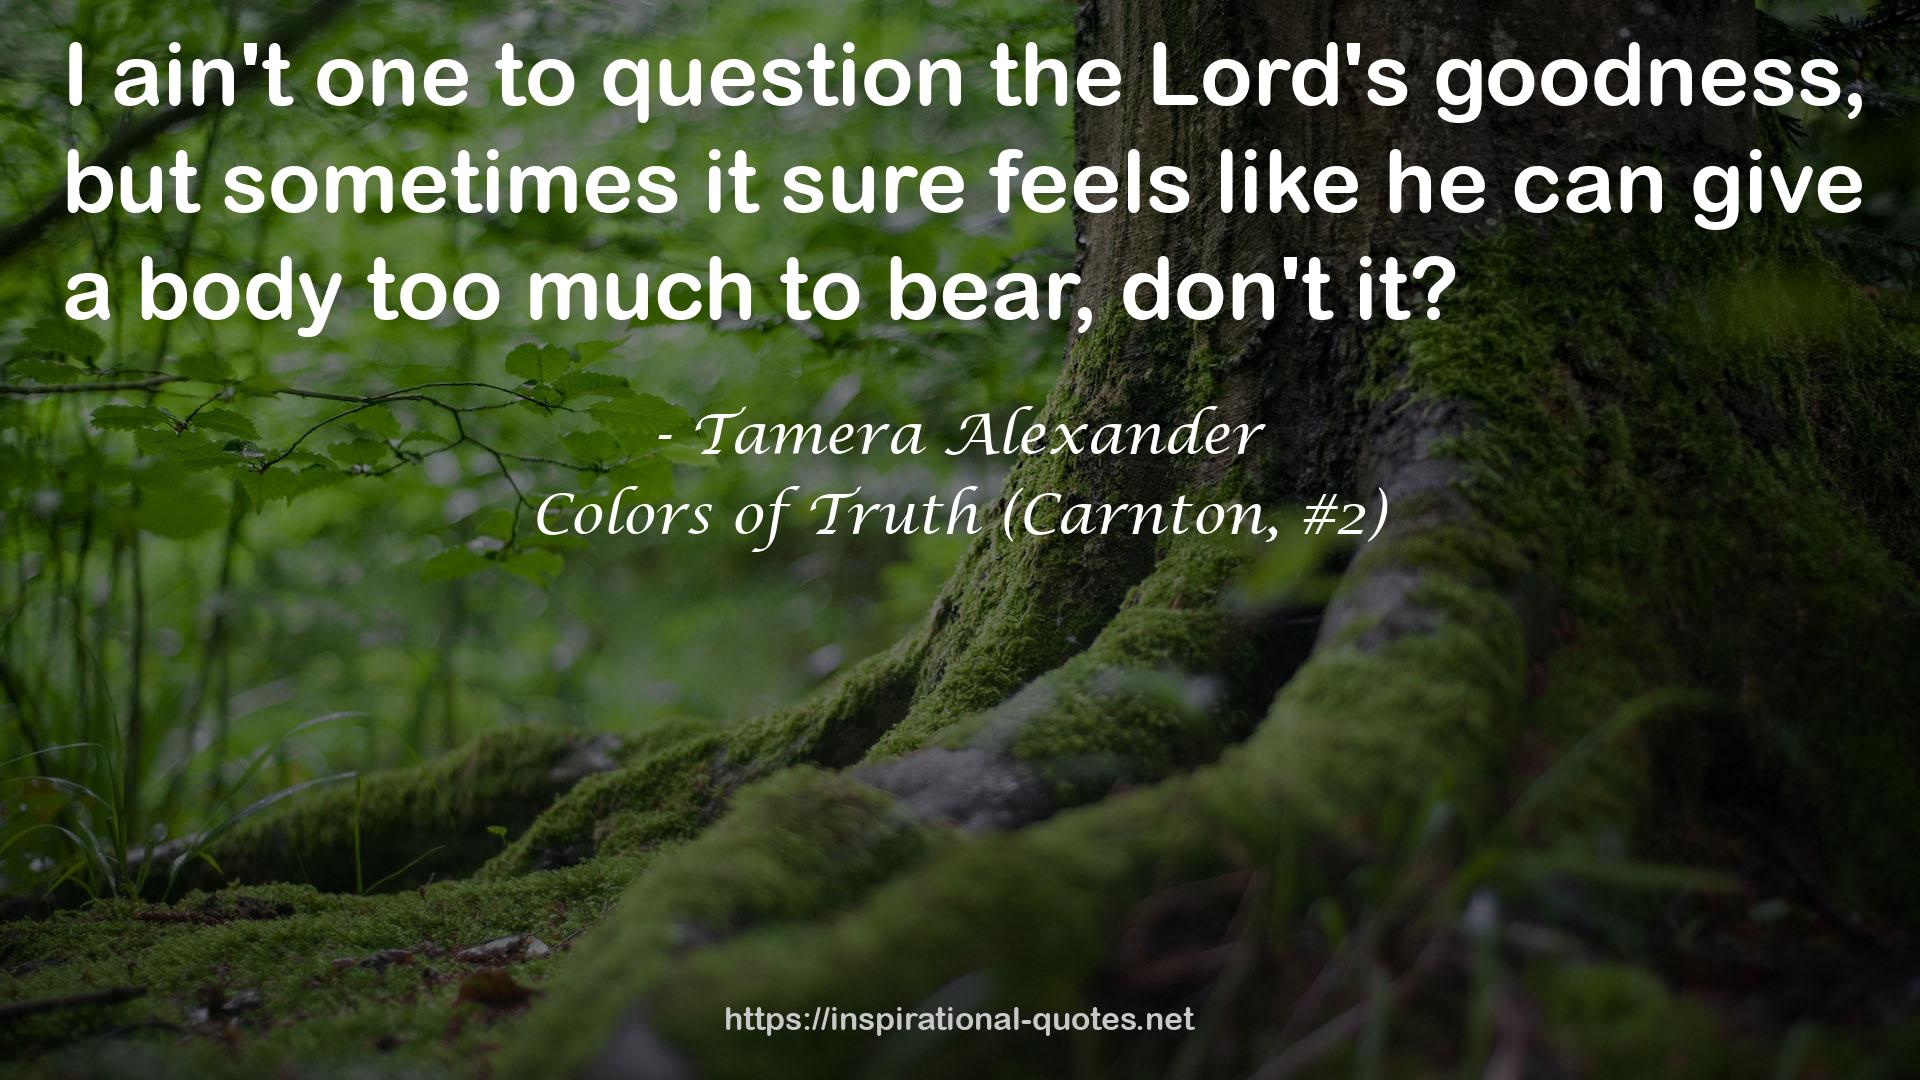 Colors of Truth (Carnton, #2) QUOTES